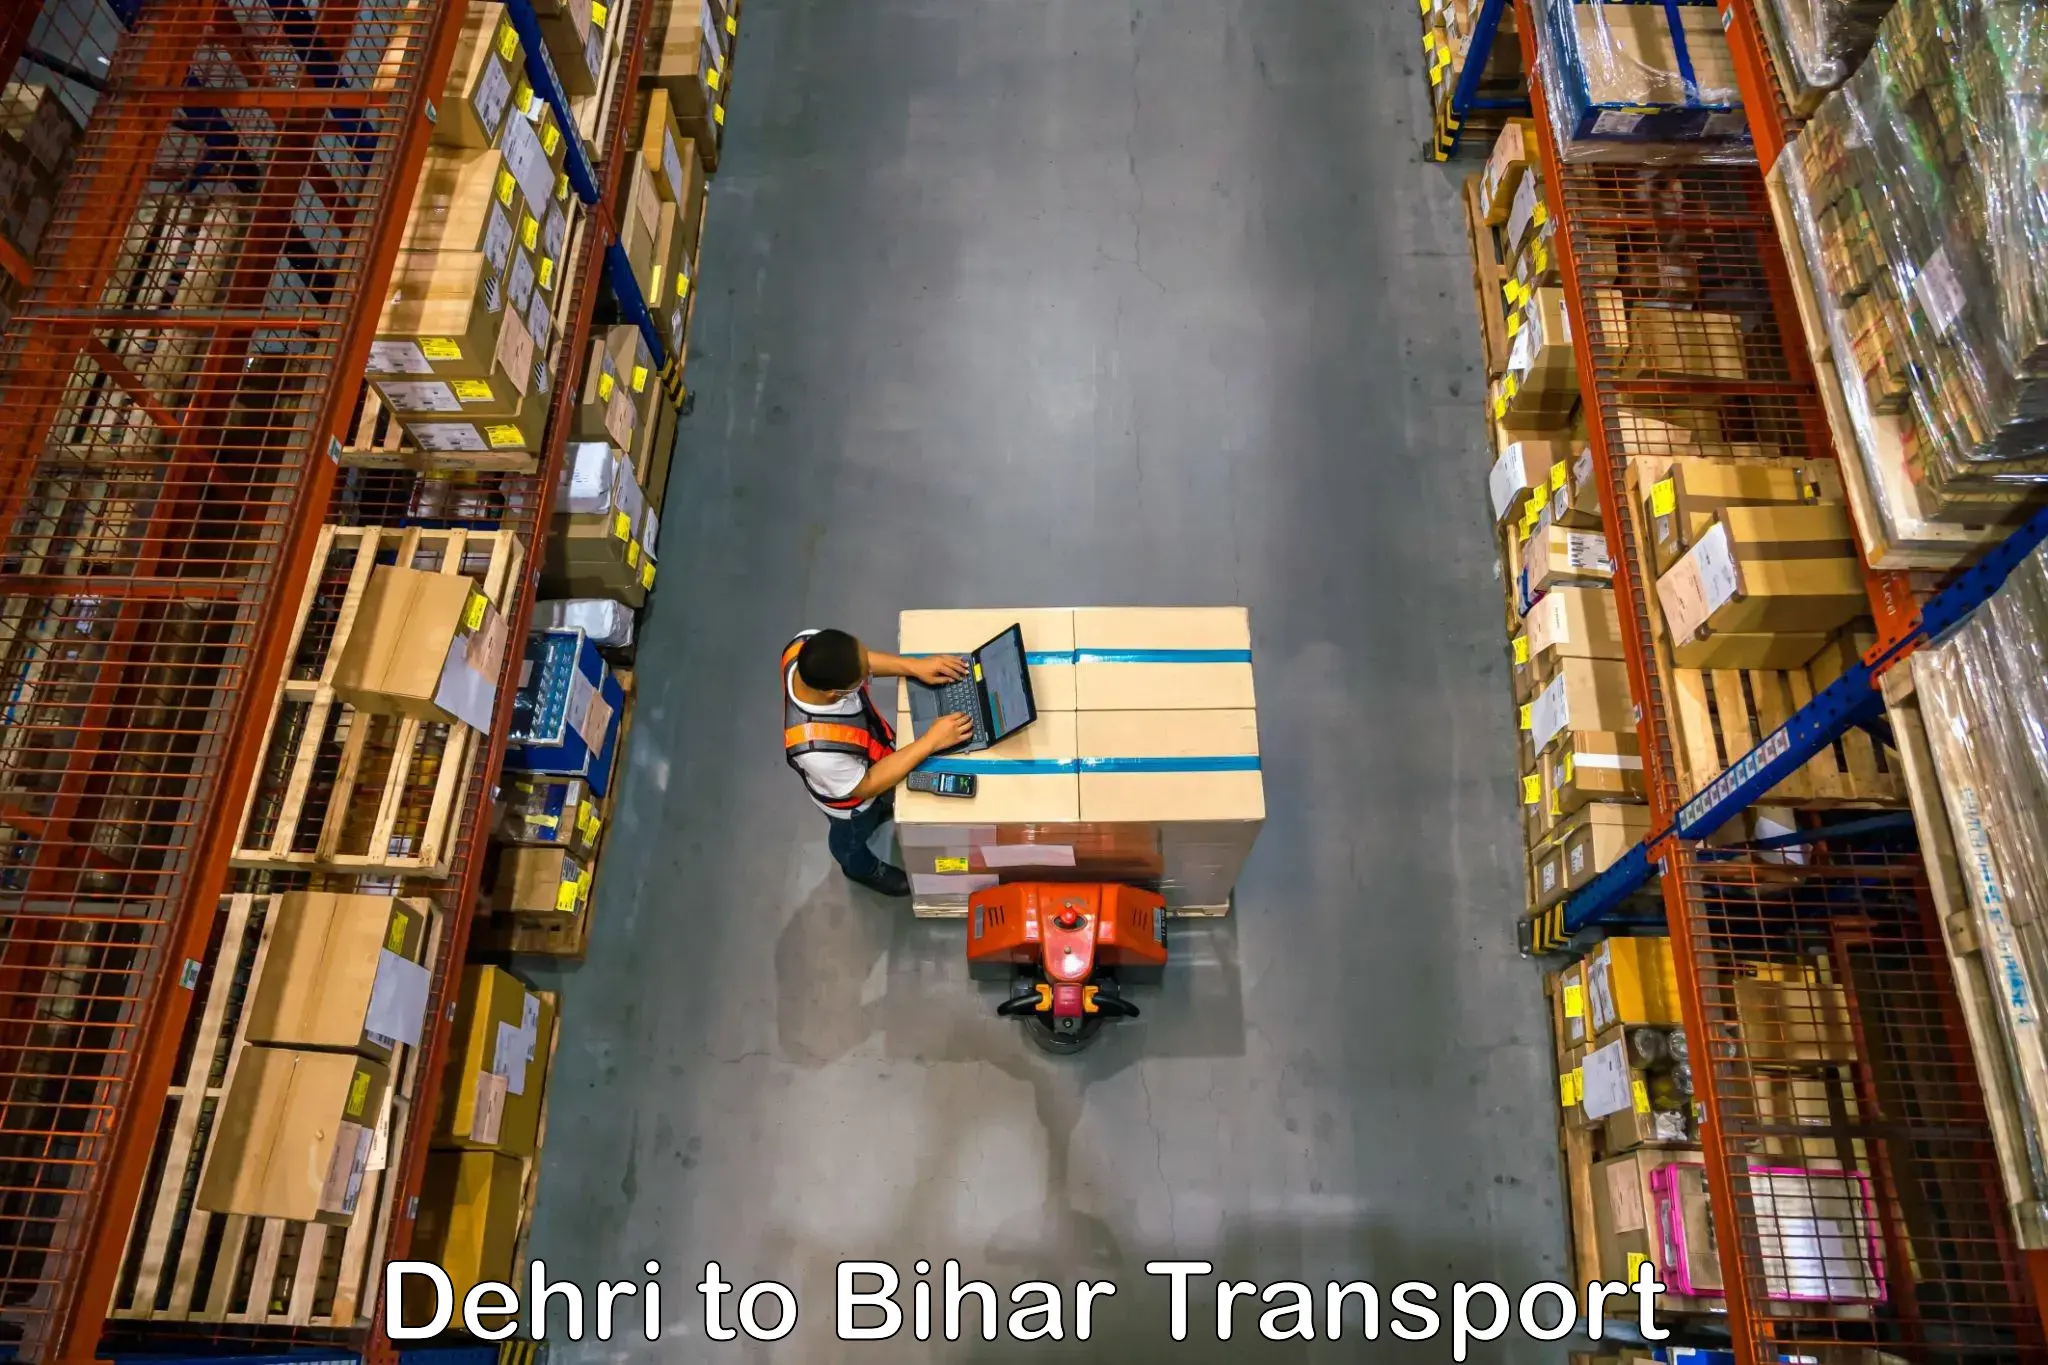 Nationwide transport services Dehri to Dhaka